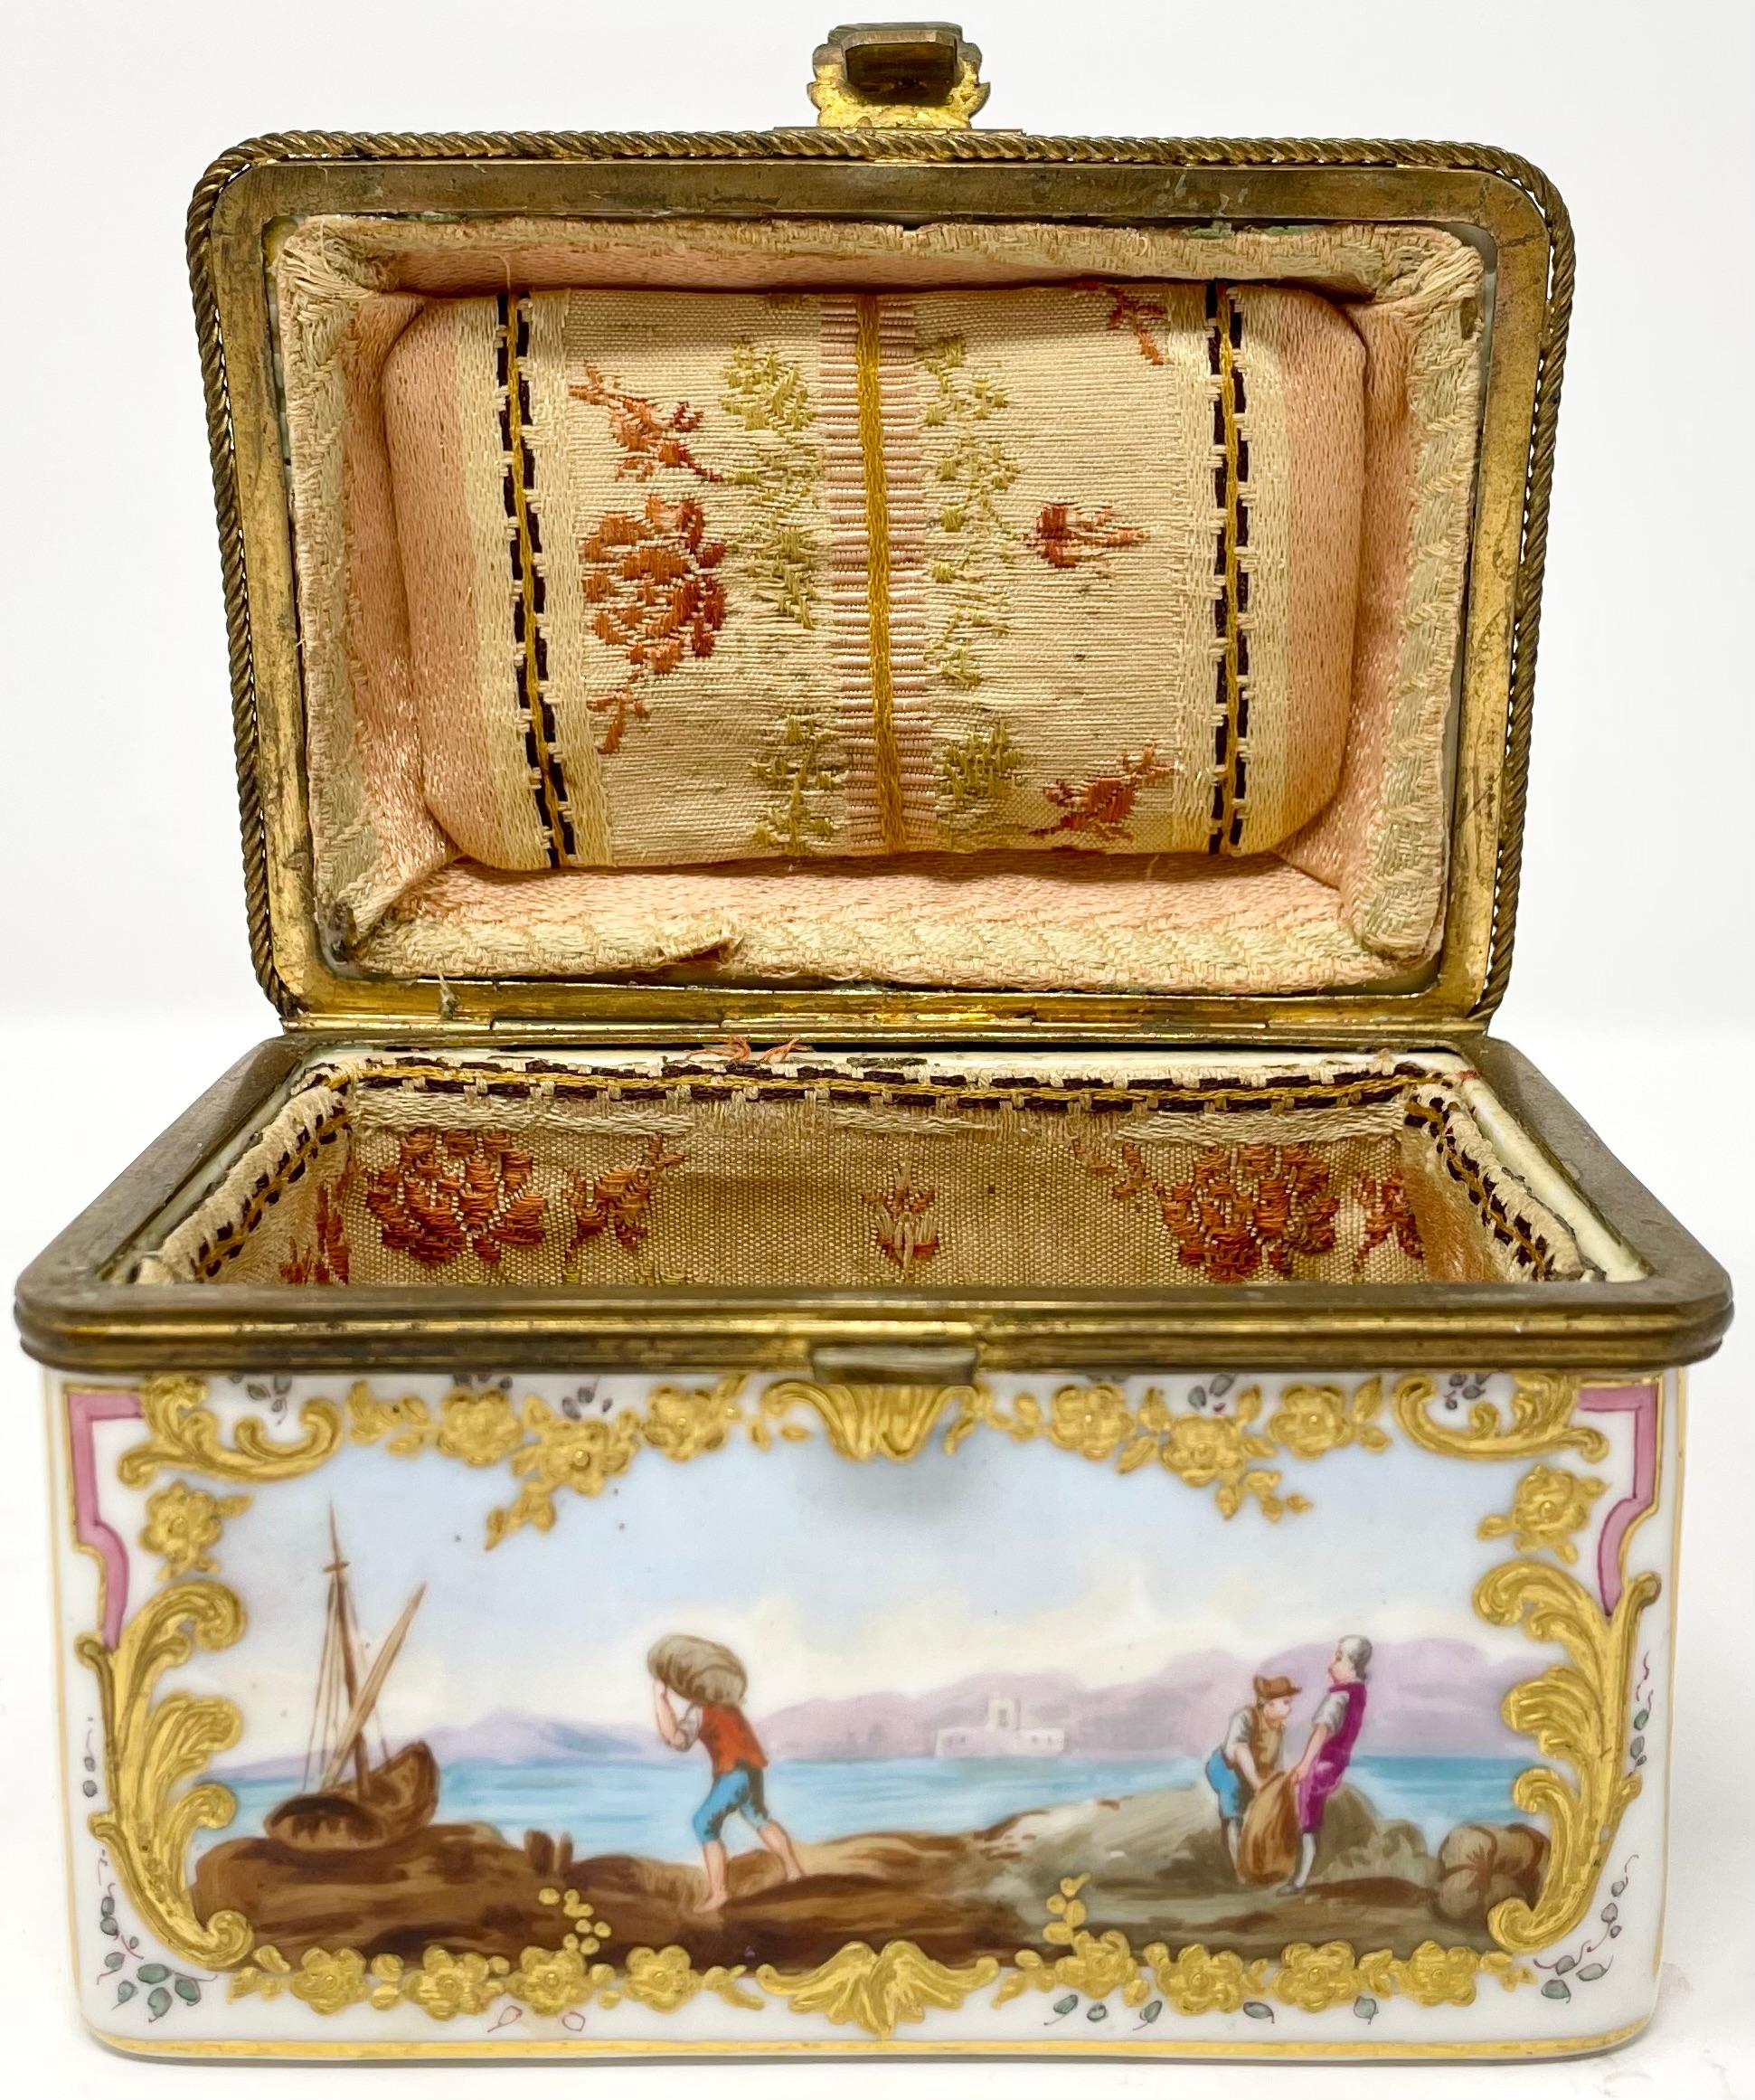 Antique German Dresden Porcelain Box with Delicate Painting, Circa 1860-1870. For Sale 3